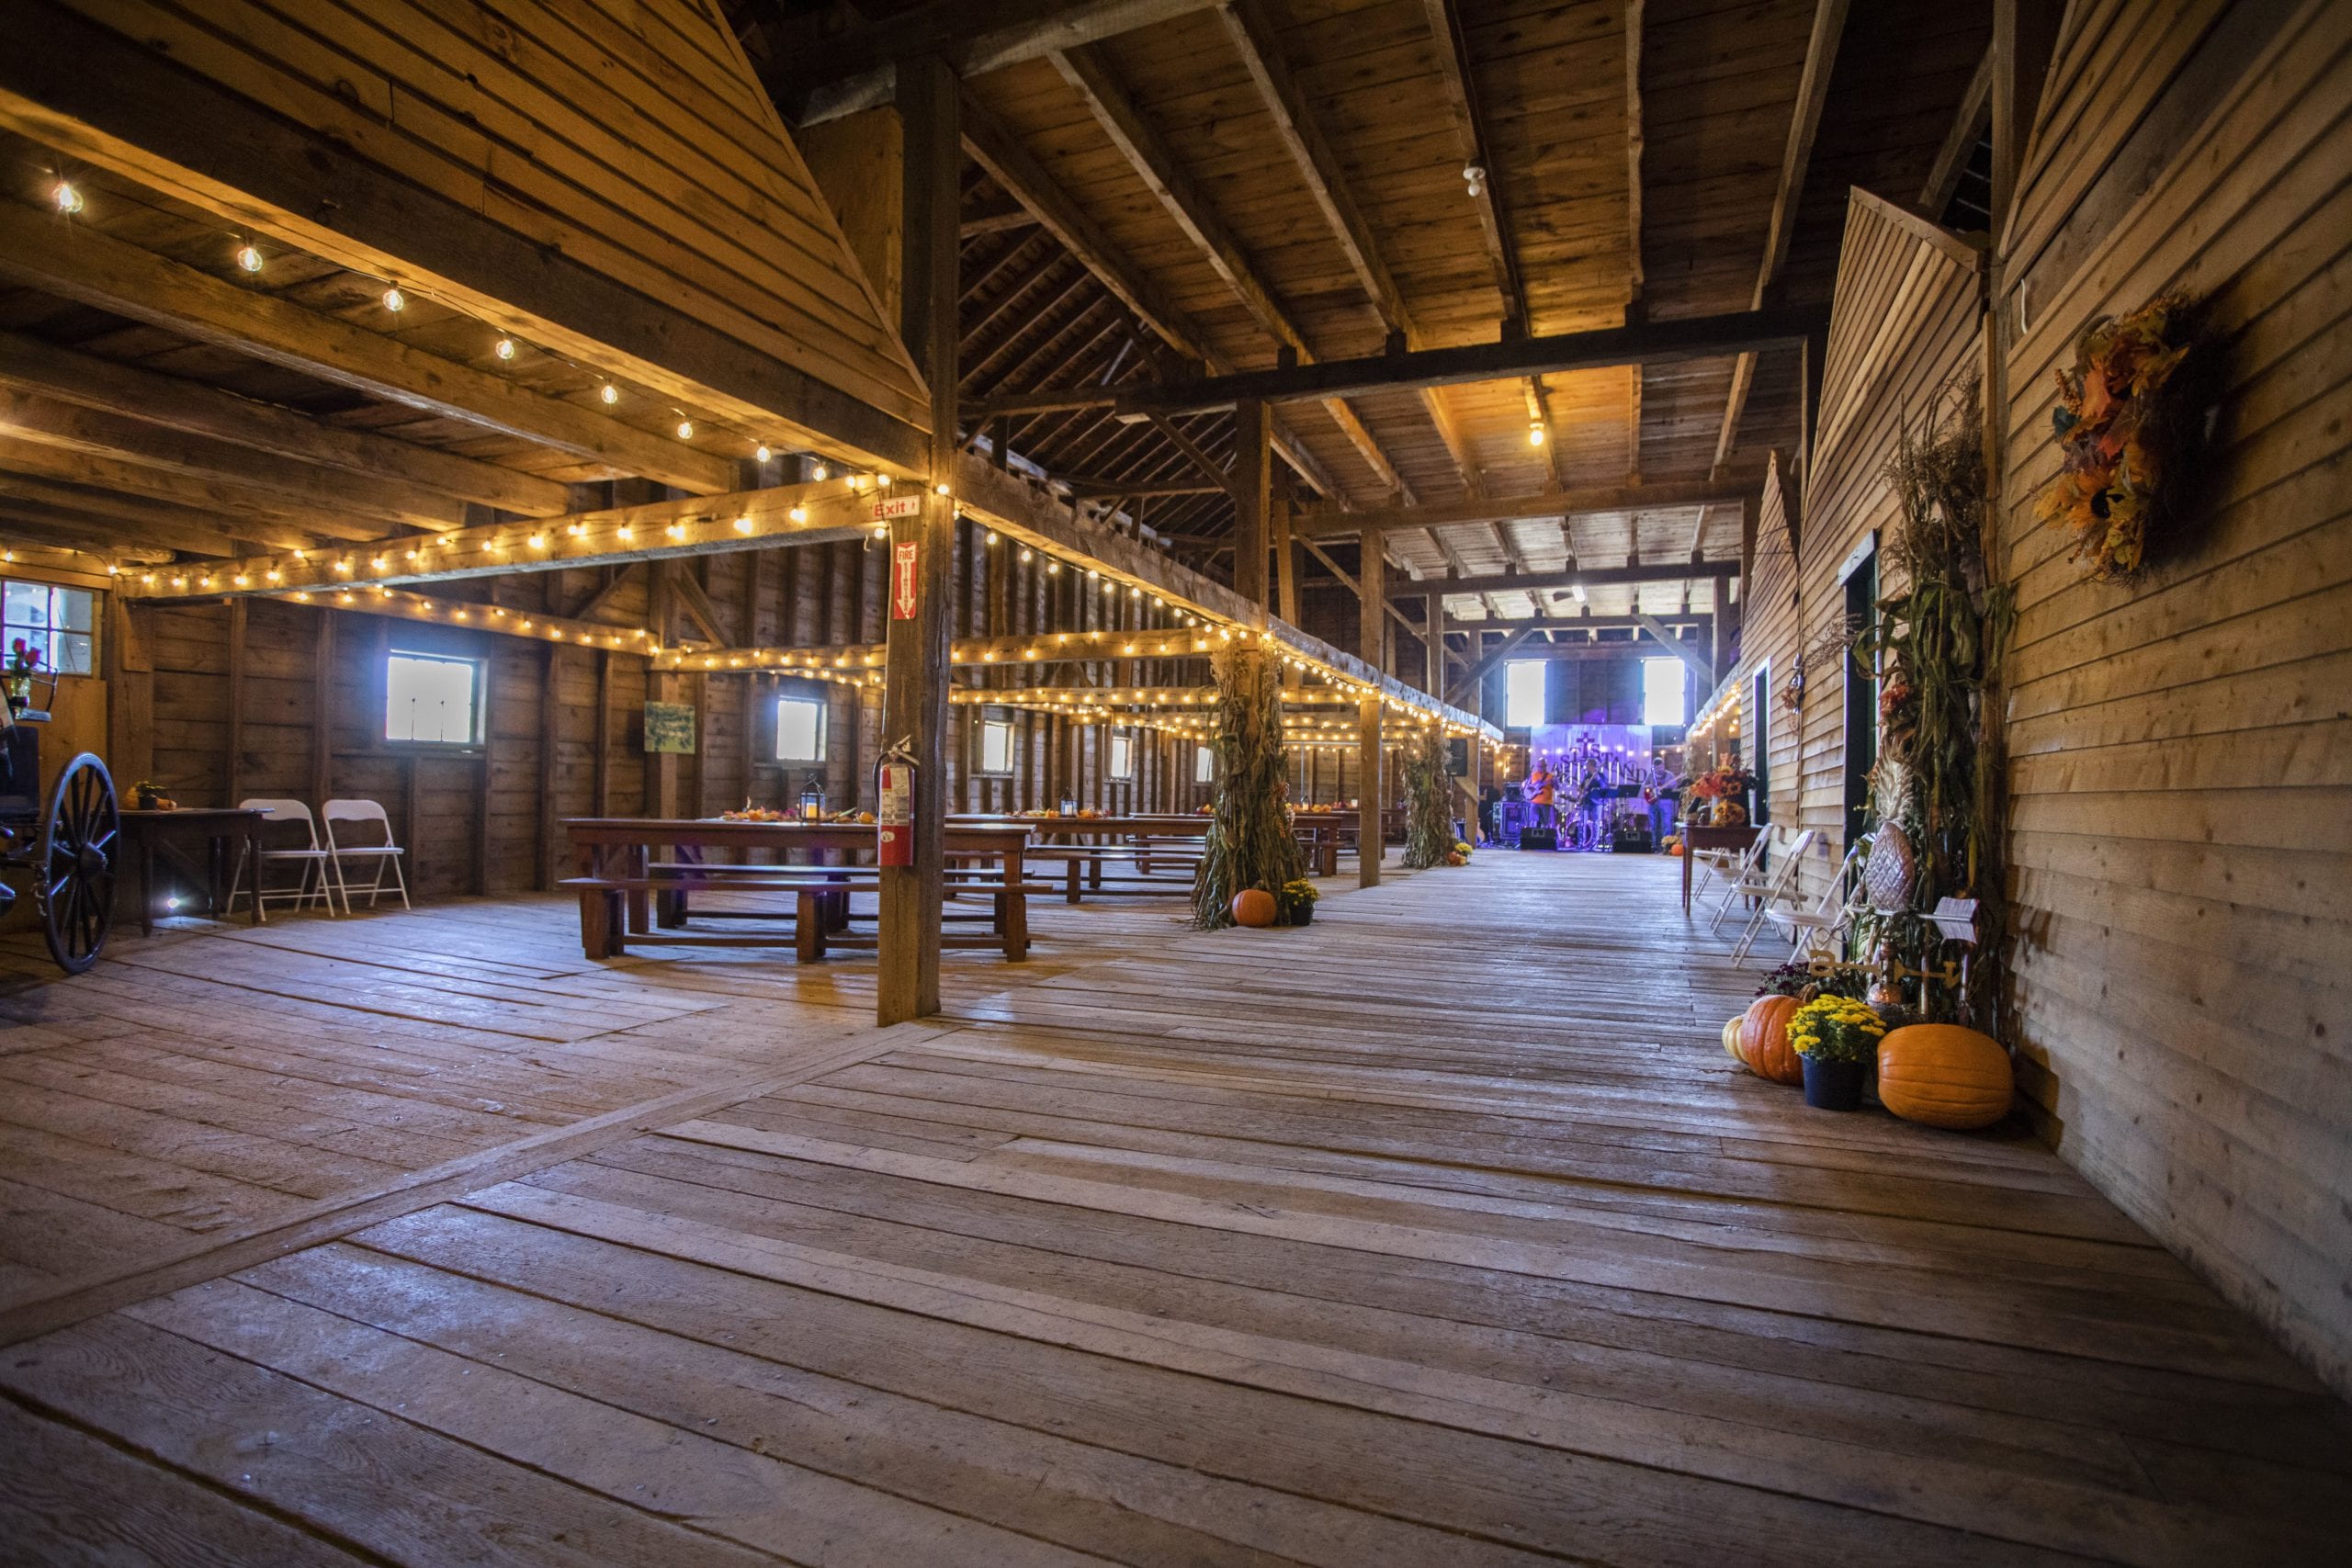 Interior of a barn that has been converted. Bulb twinkle lights hang above low beams on the left where tables are arranged, while the far end has large windows overlooking the inside.